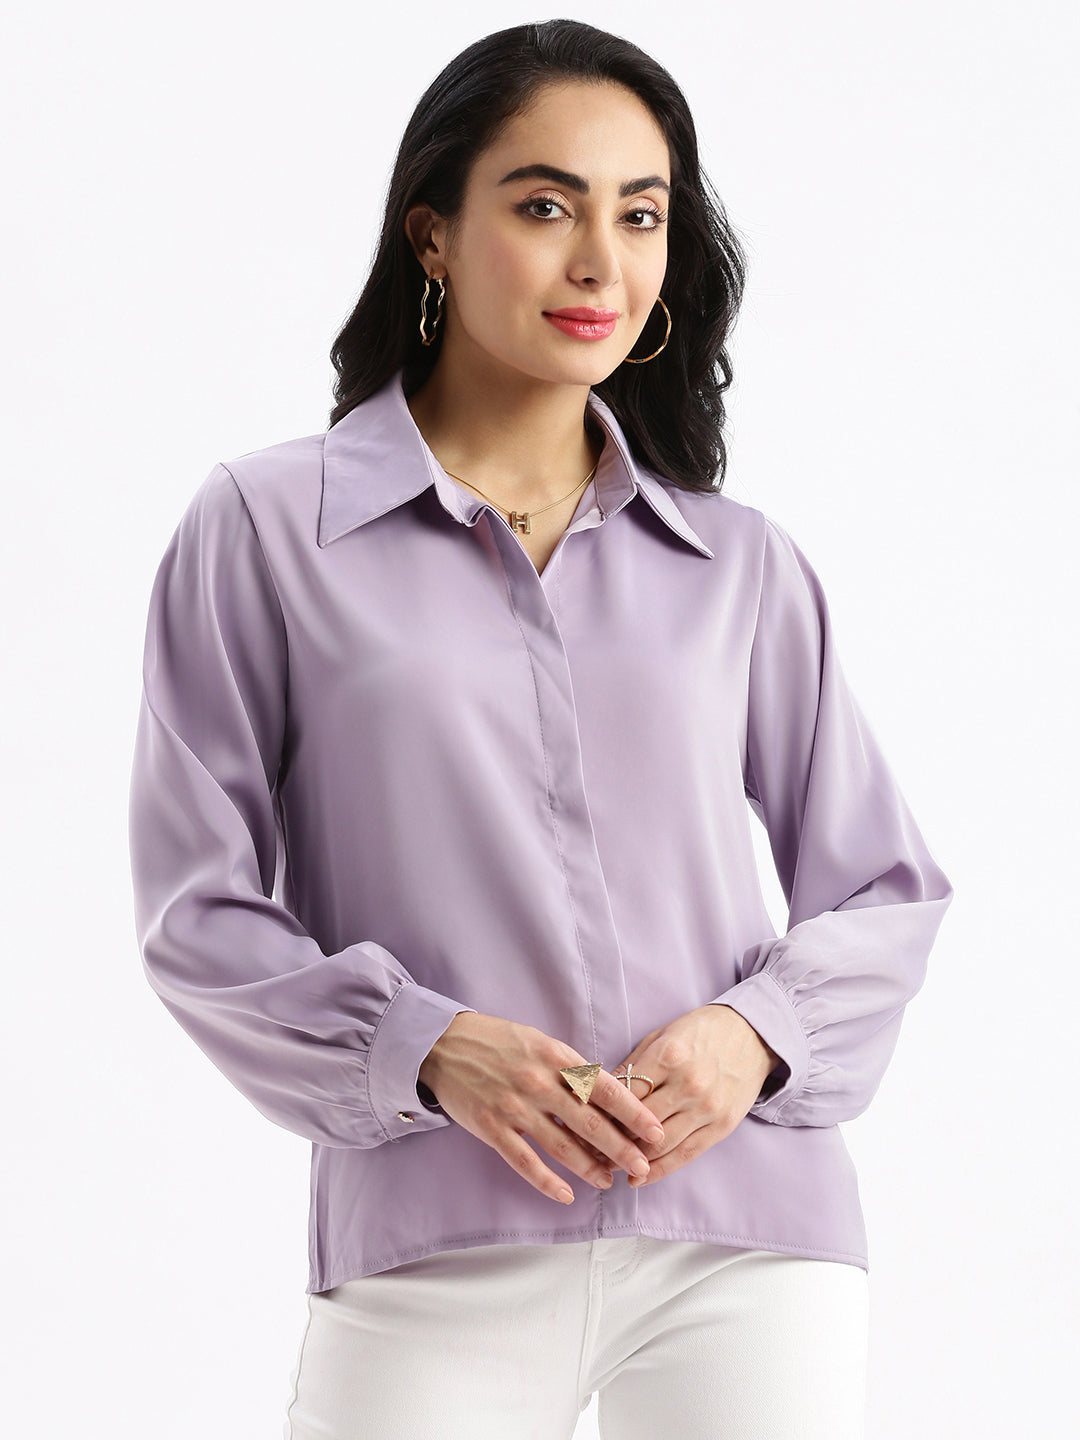 Women Solid Lavender Top with Neck Chain